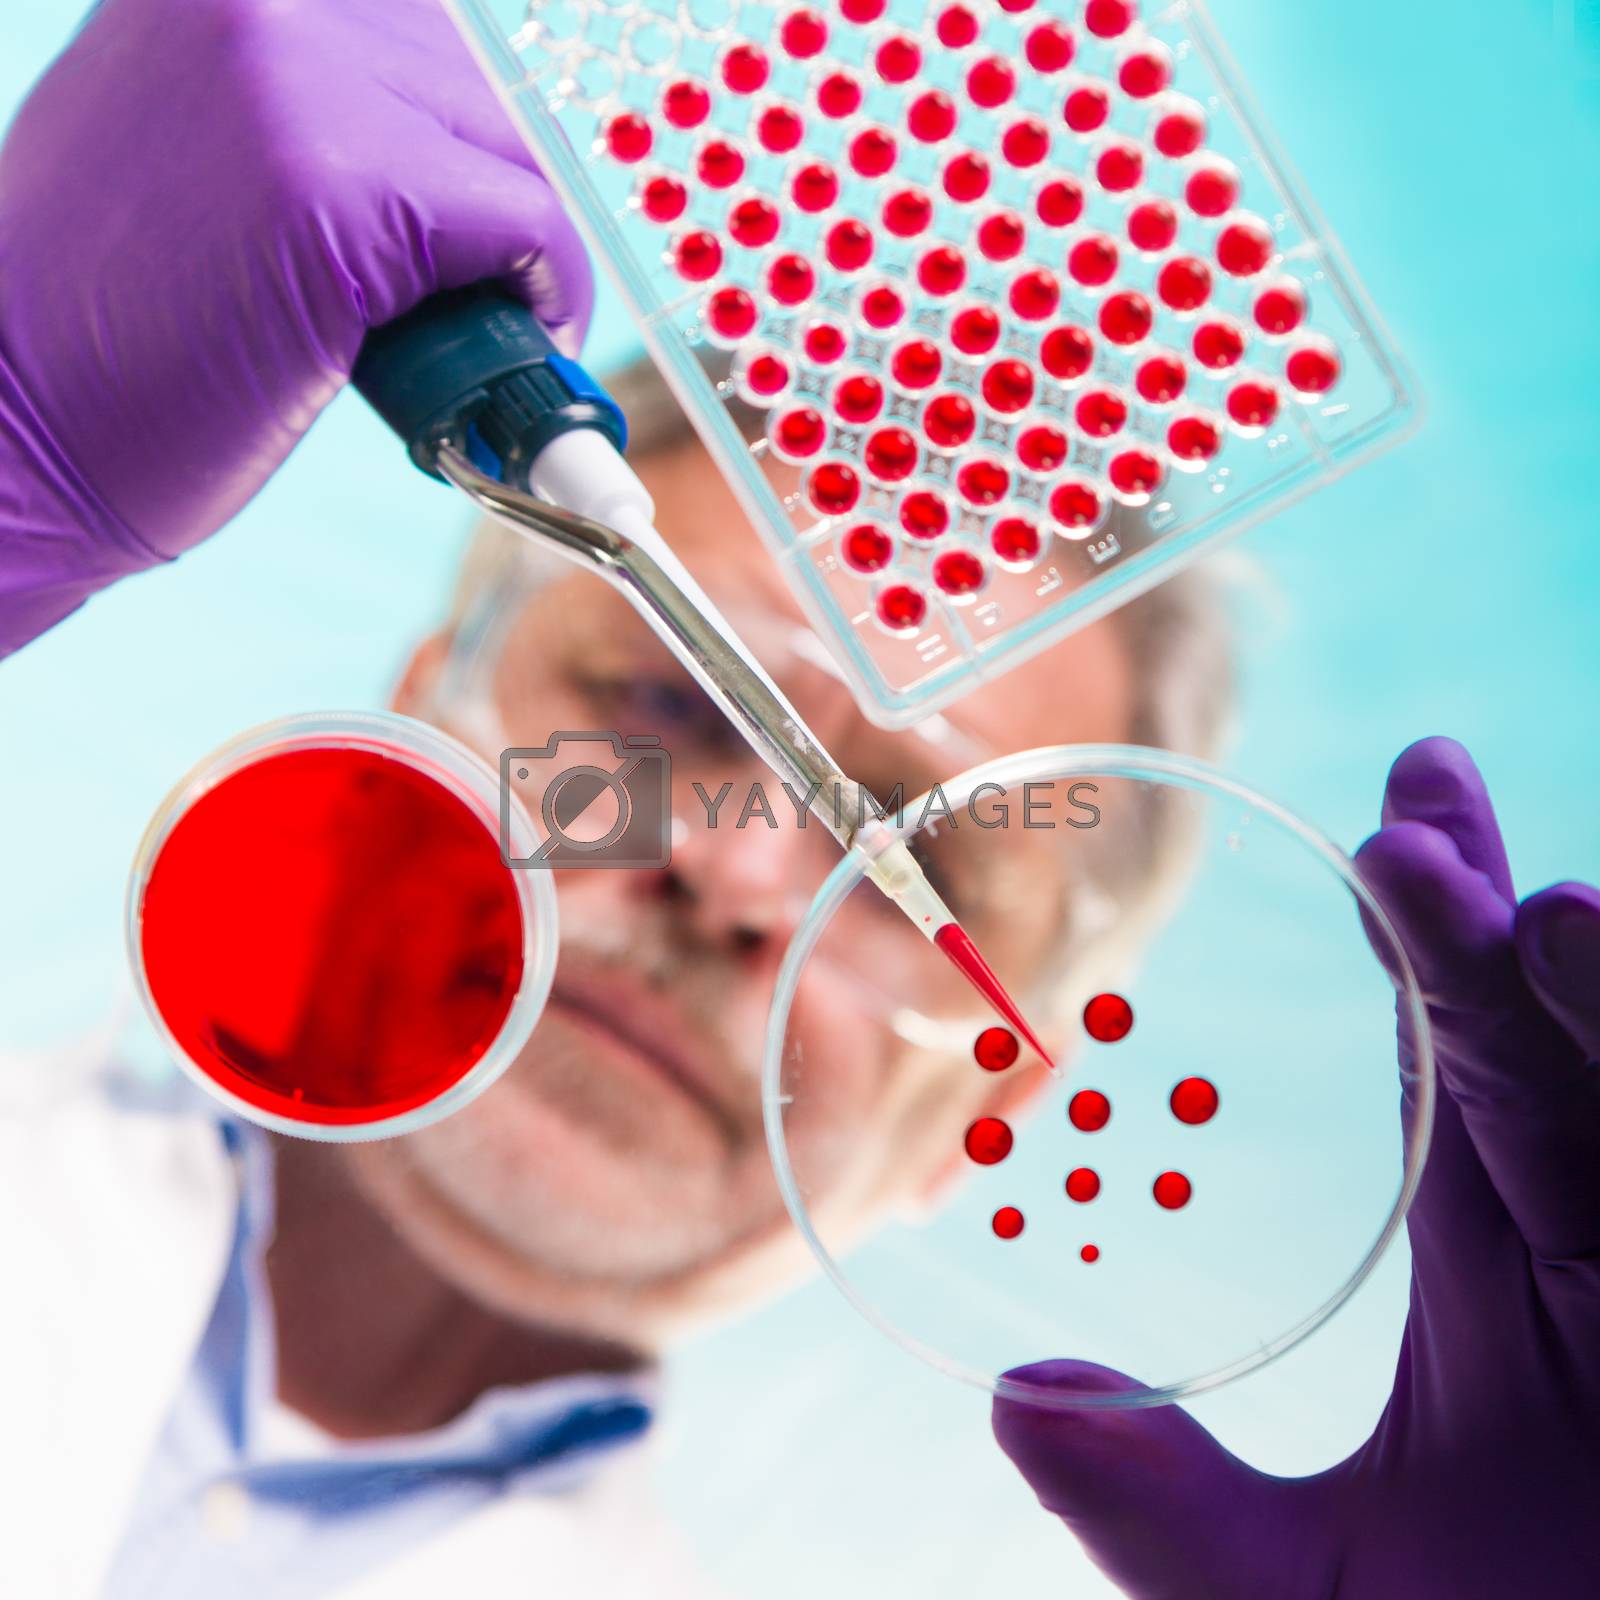 Royalty free image of Senior life science researcher grafting bacteria. by kasto